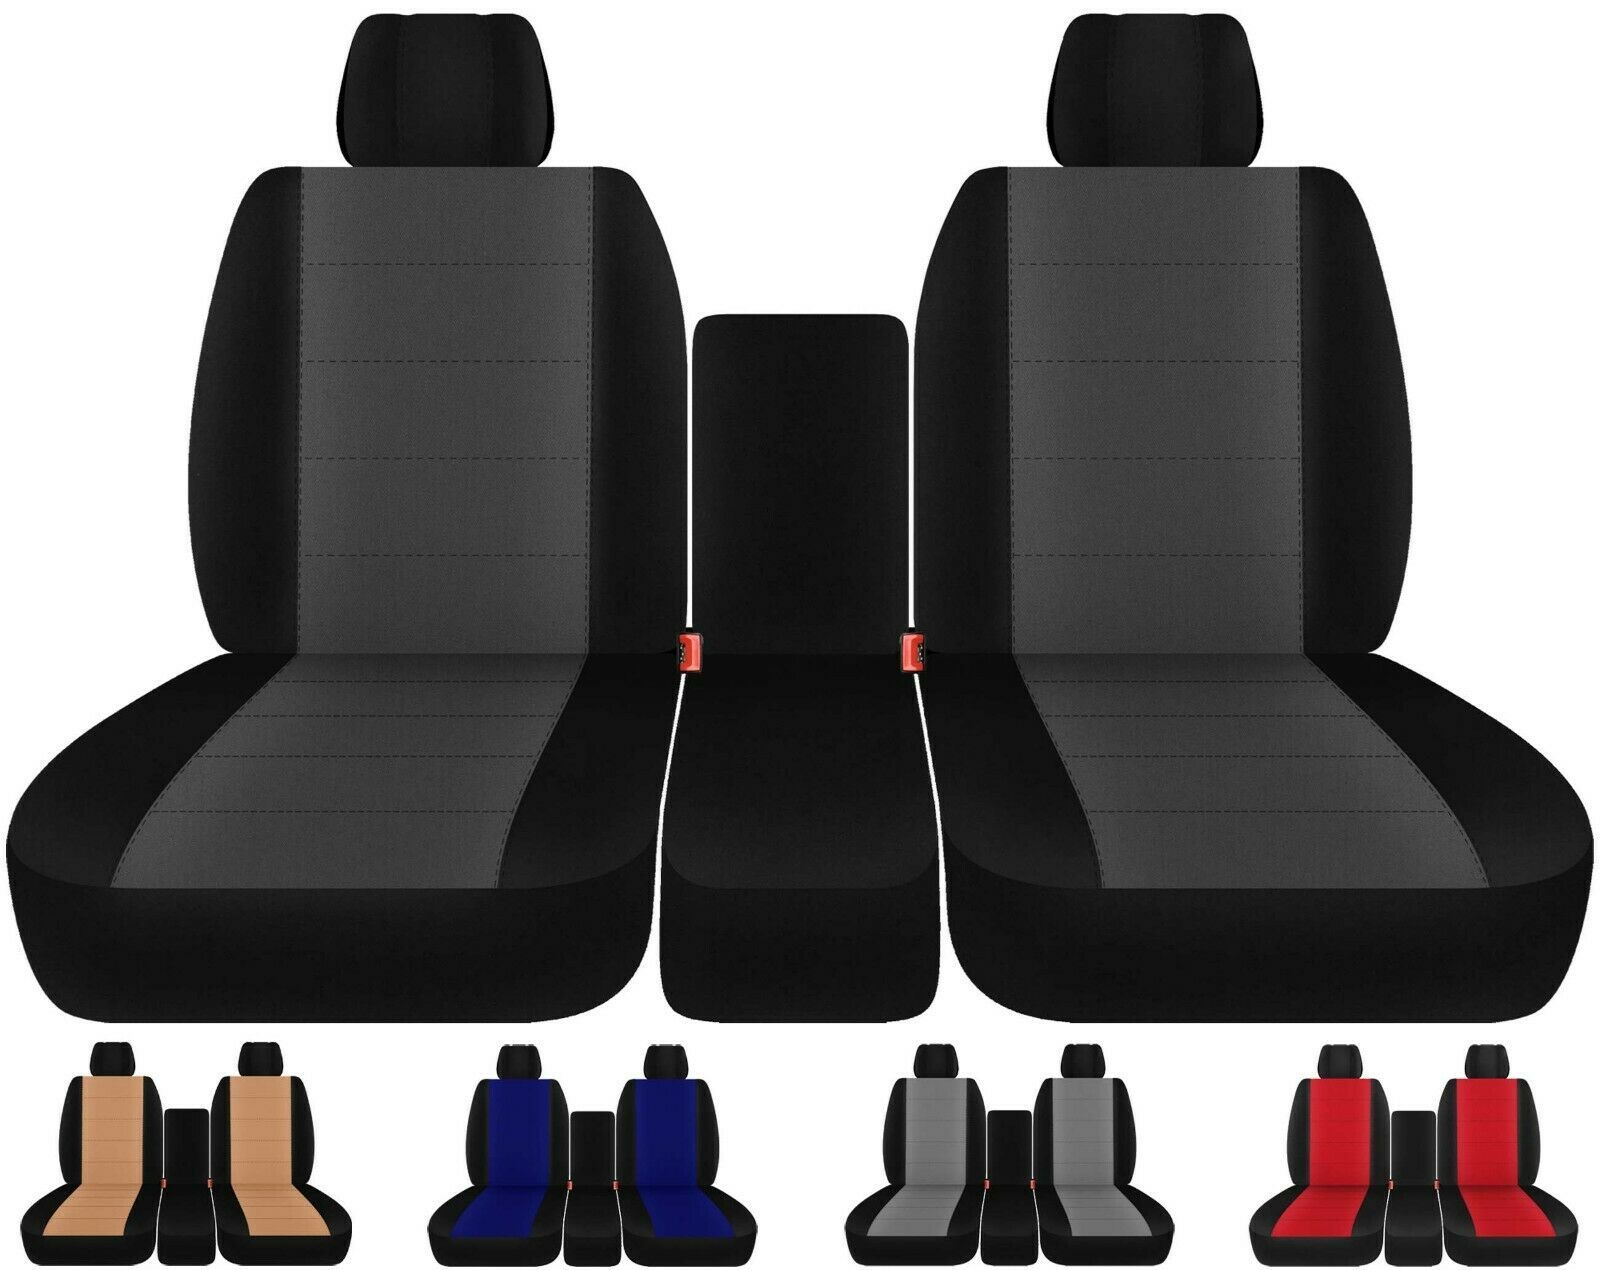 40-20-40 Front set car Seat covers Fits Ford F150 truck 2009 to 2021  two tone - $109.99